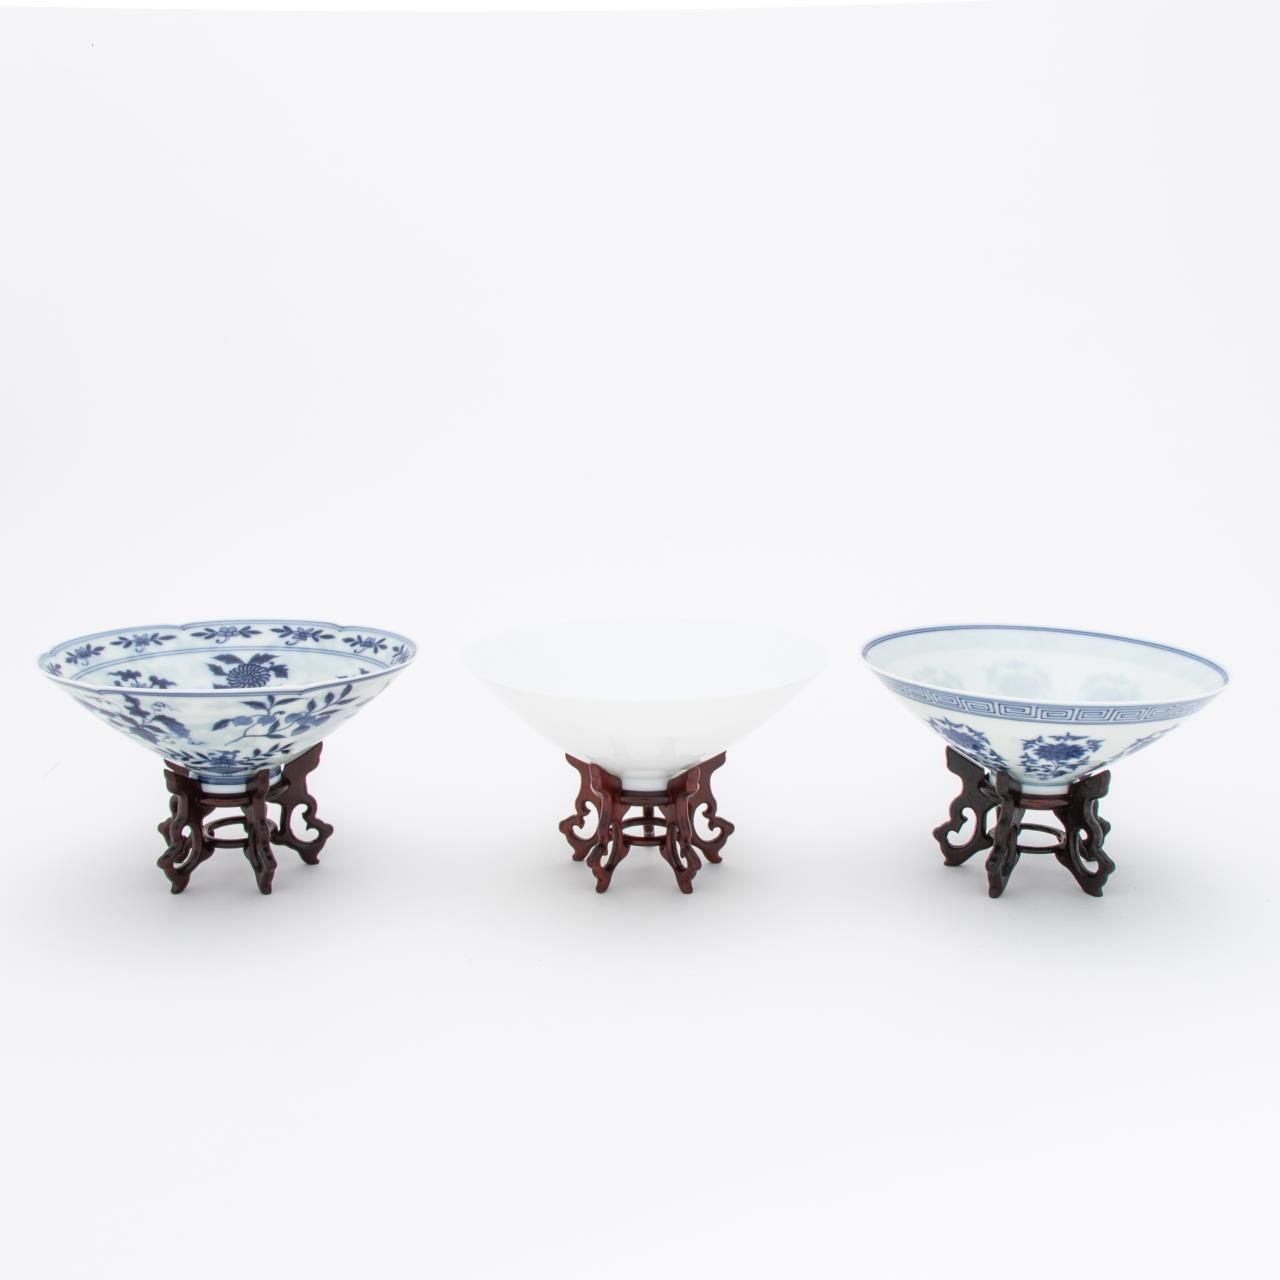 THREE CHINESE ANHUA BOWLS ON WOODEN 35db8b